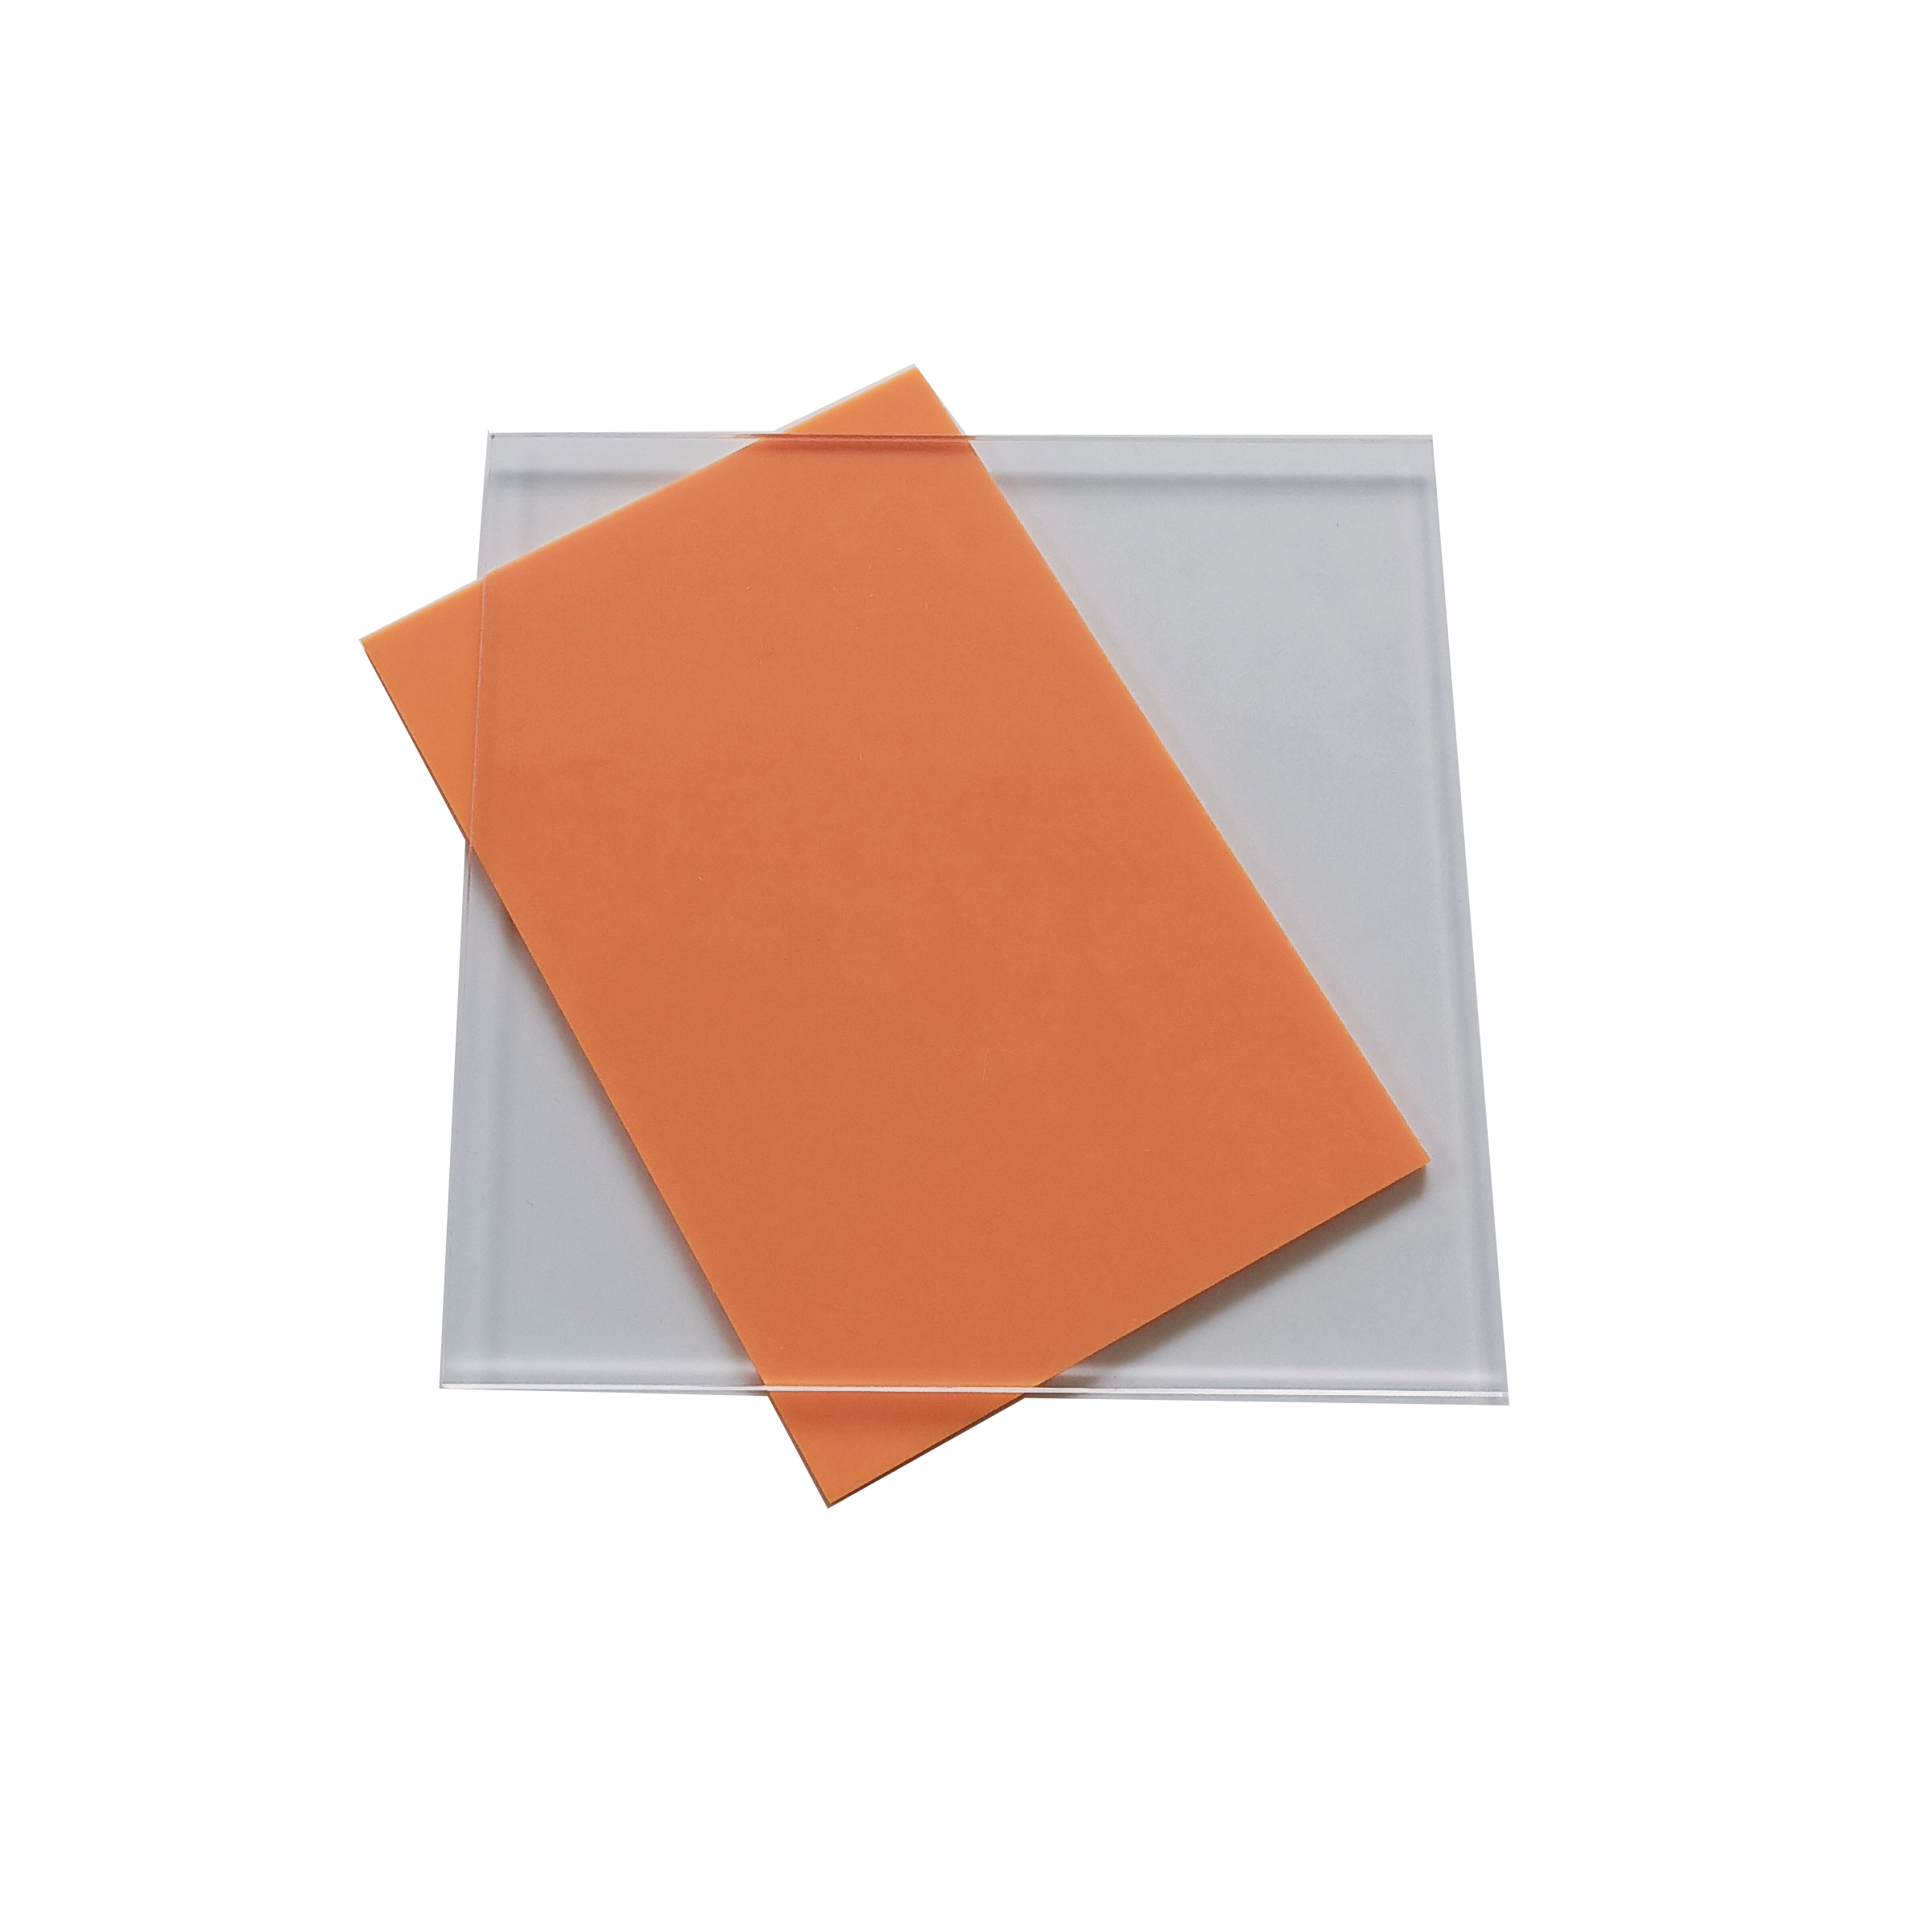 Acrylic Sheets Opaque 1.5 Mm Acrylic Sheets Transparent Clear Acrylic Sheets for Laser